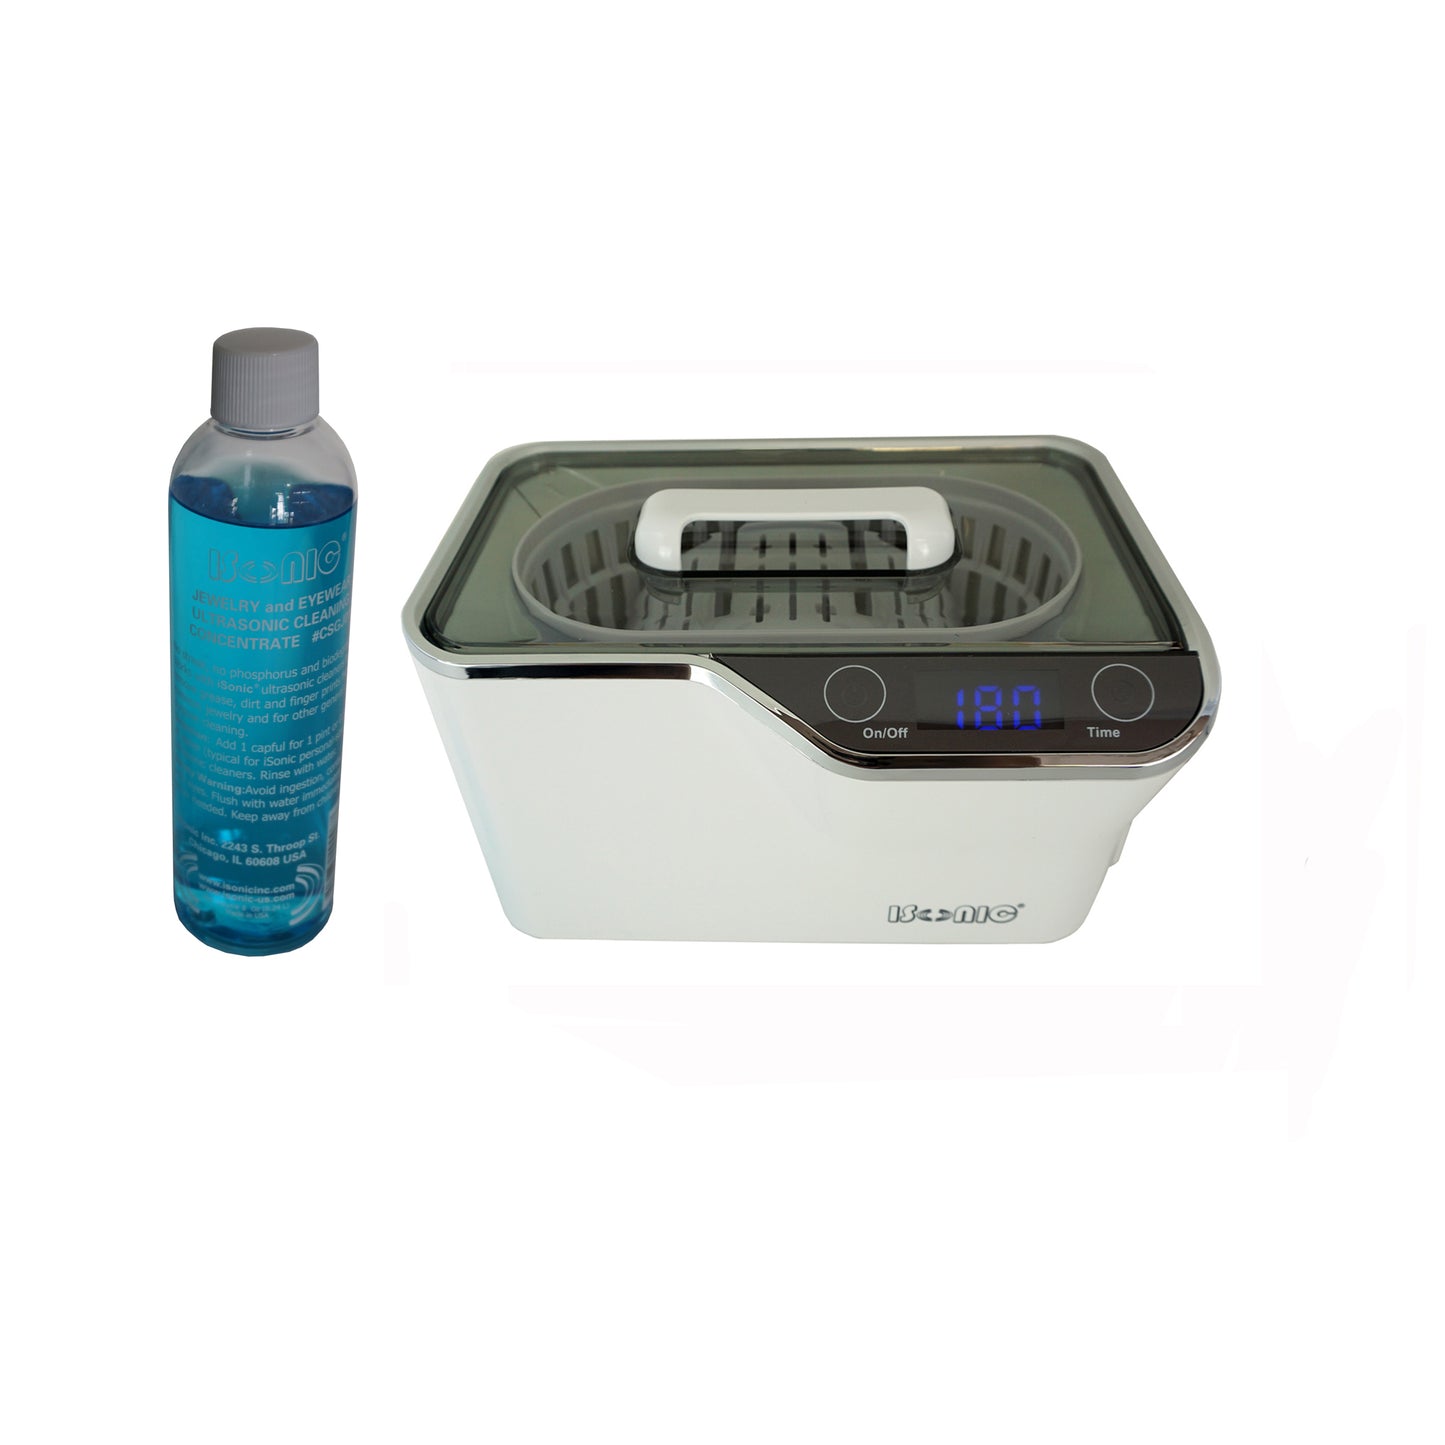 CDS100+CSGJ01 | iSonic® Digital Touch Sensing Ultrasonic Cleaner, with Jewelry/Eyewear Cleaning Solution Concentrate CSGJ01, 8OZ, Promotional Price!